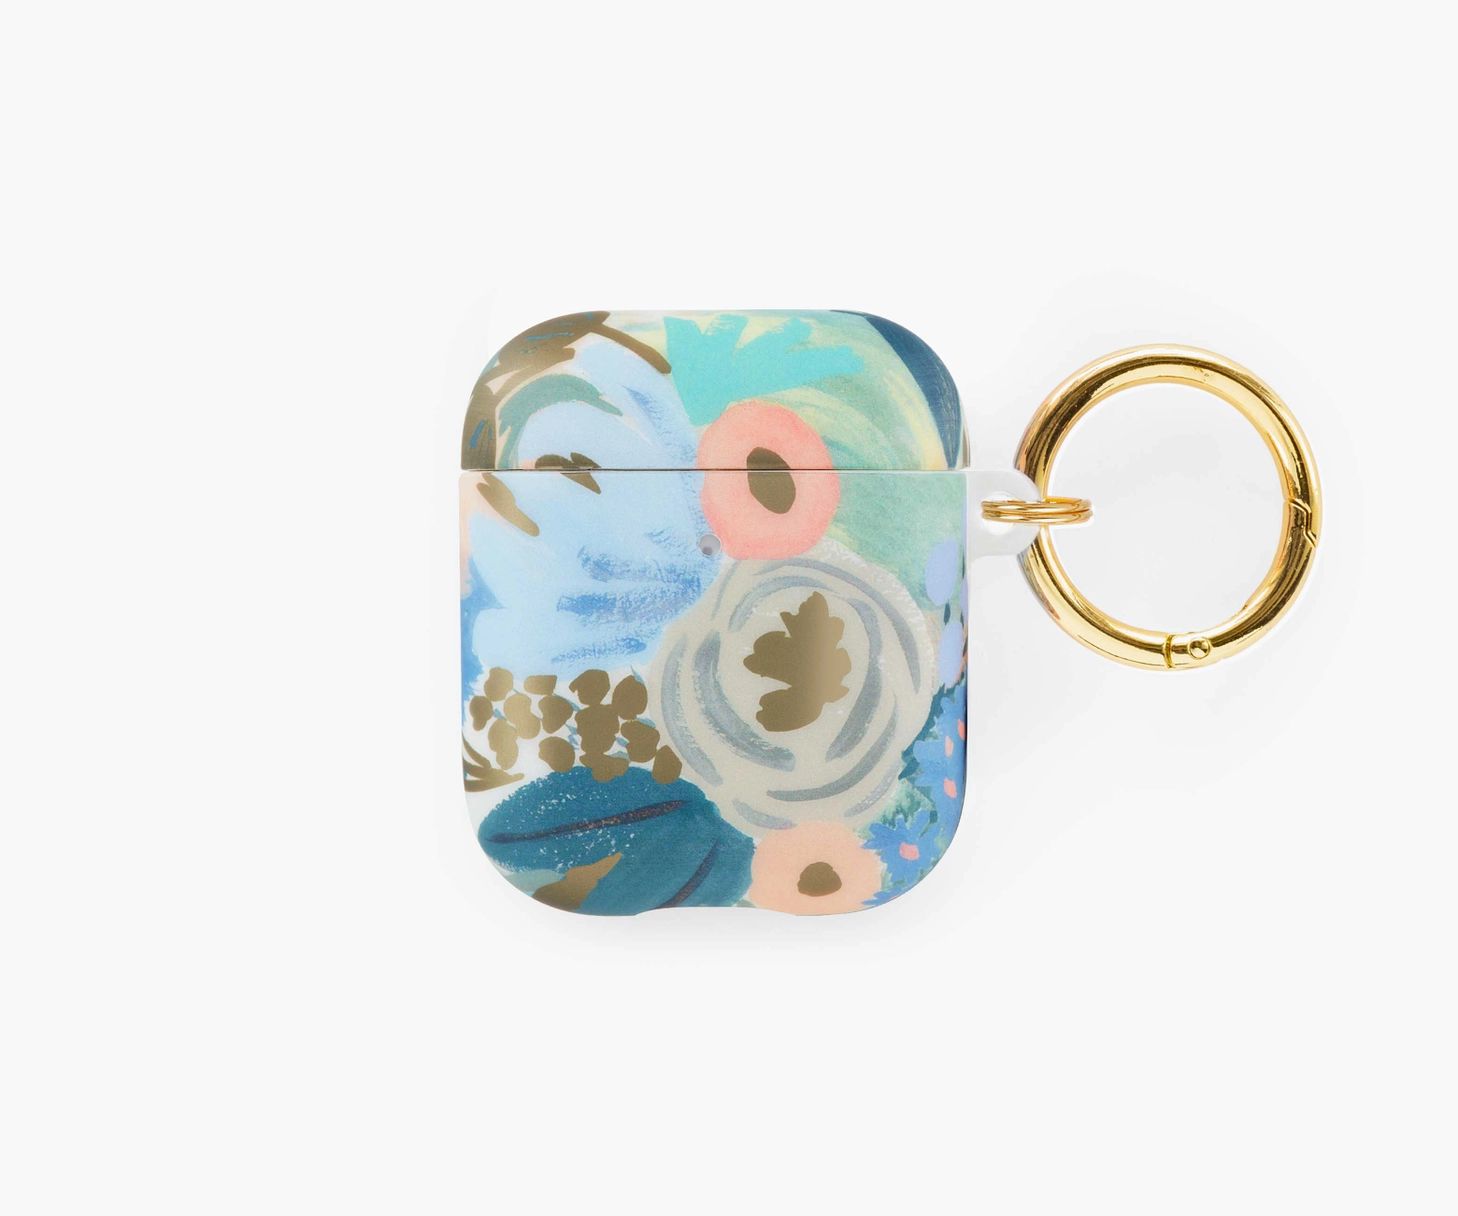 Luisa AirPods Case | Rifle Paper Co.